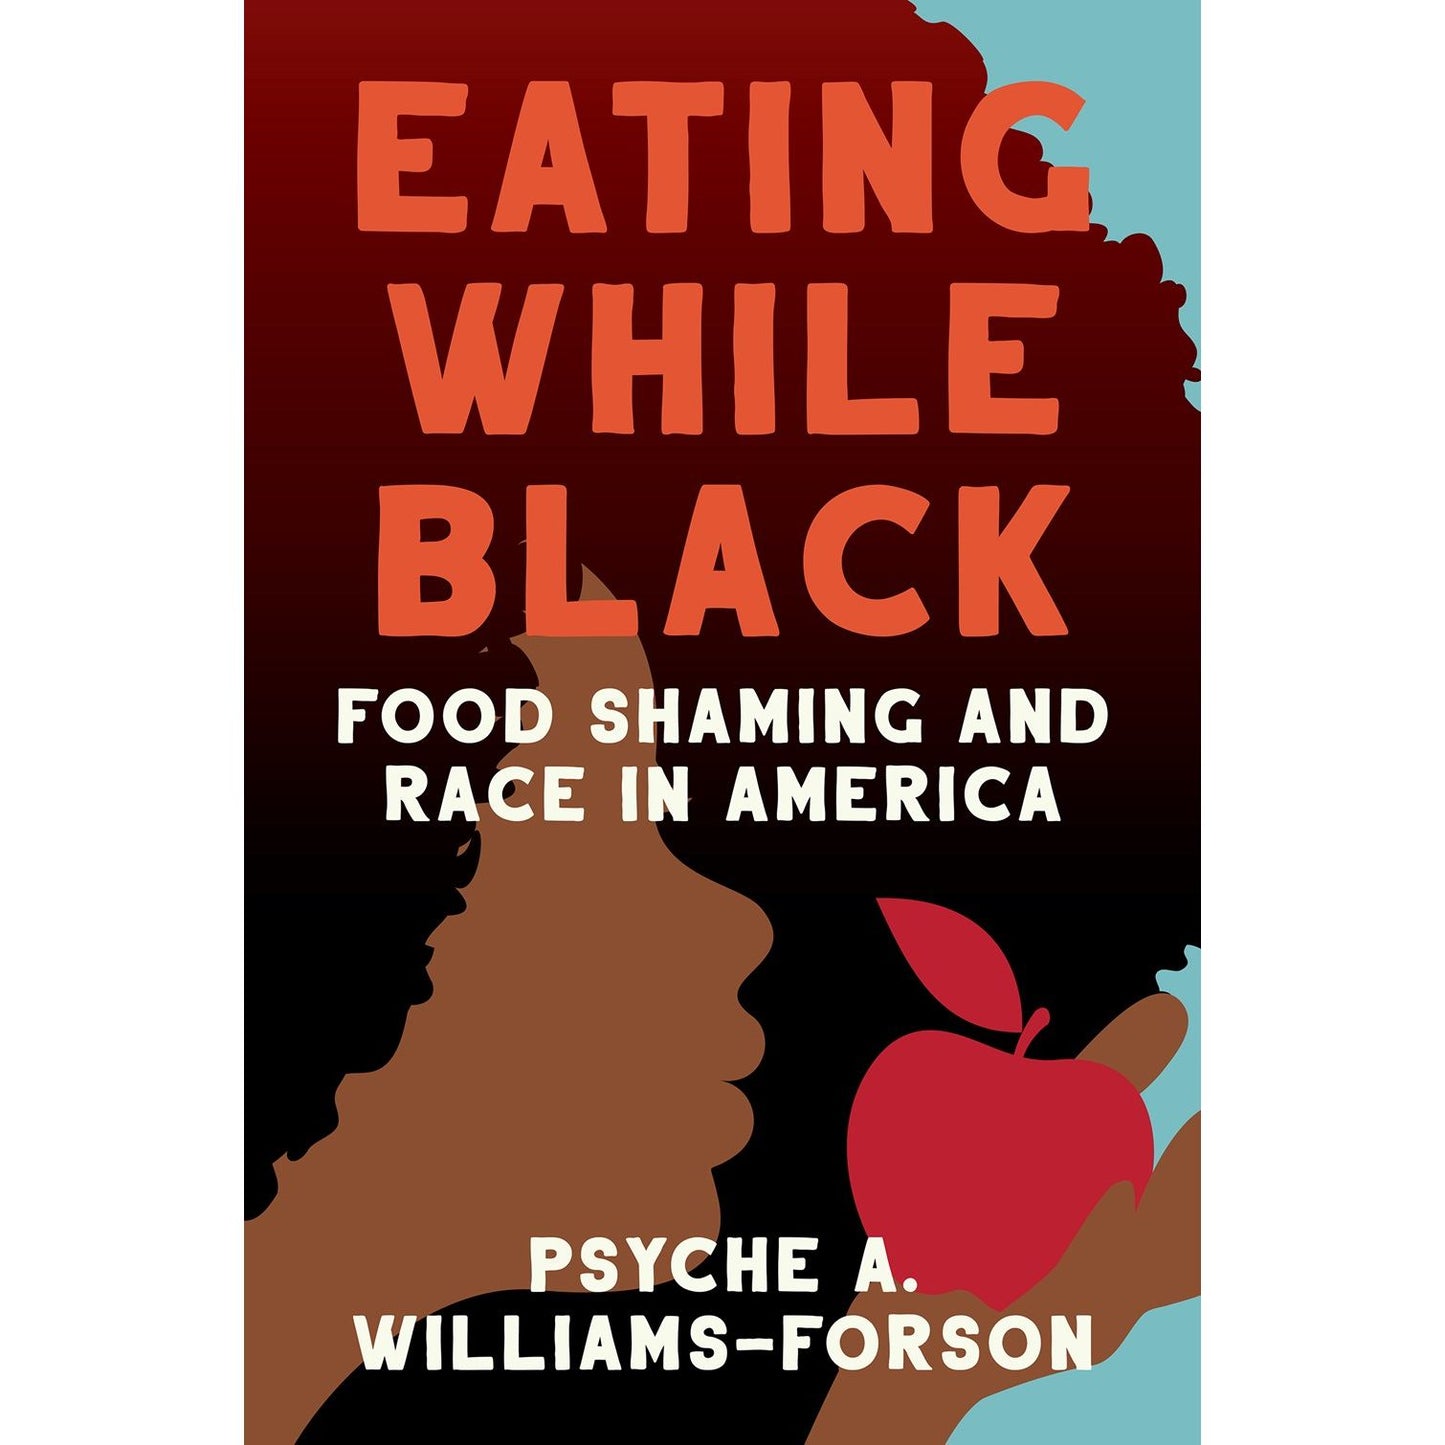 Eating While Black (Psyche A. Williams-Forson)